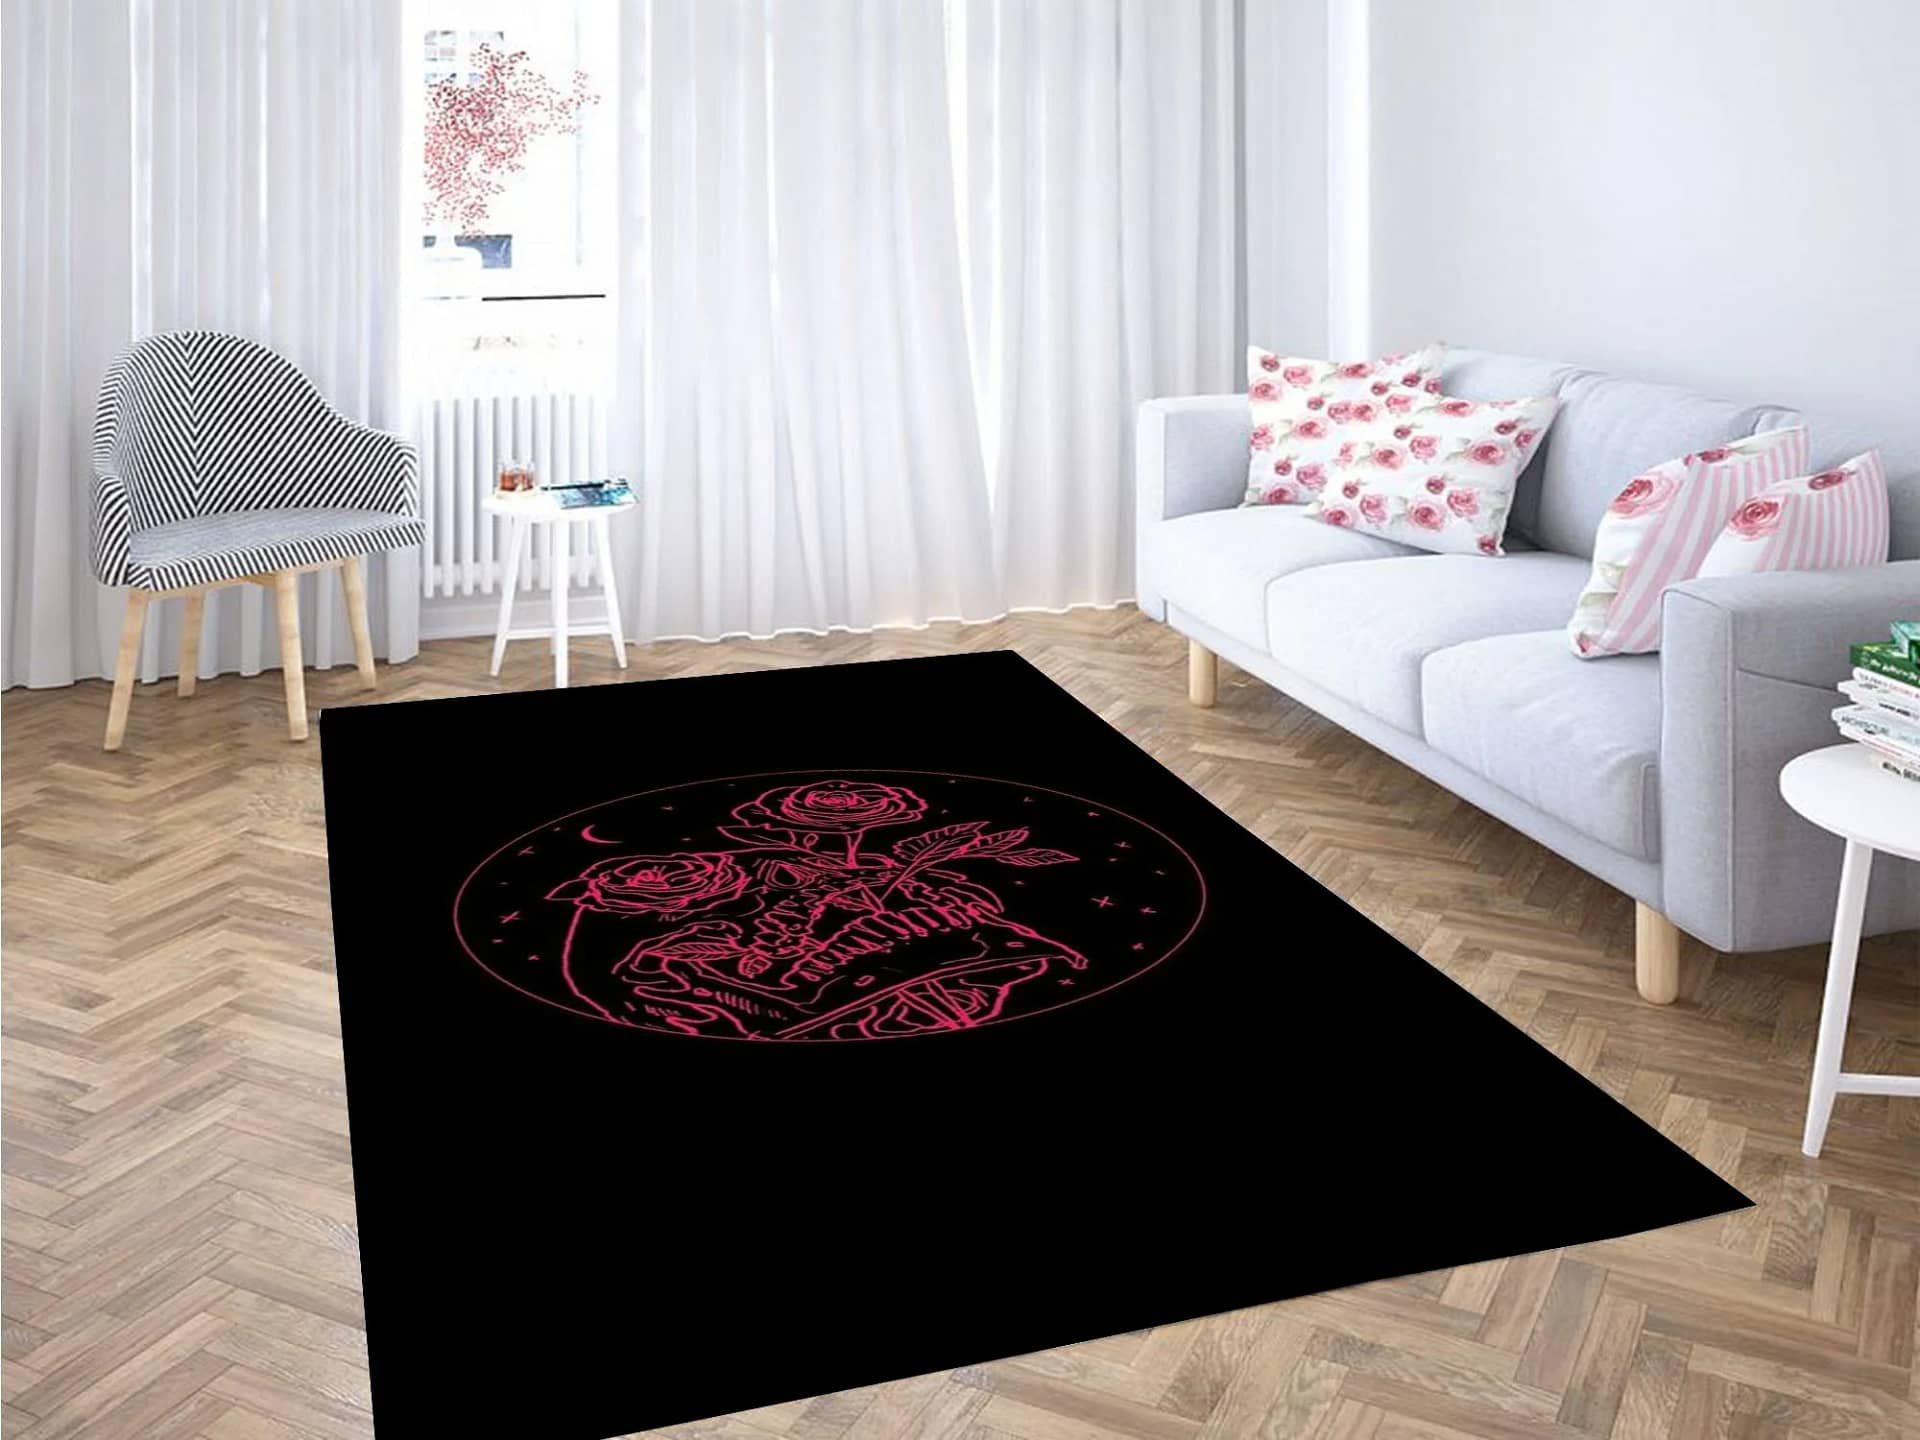 Aesthetic Backgrounds Carpet Rug